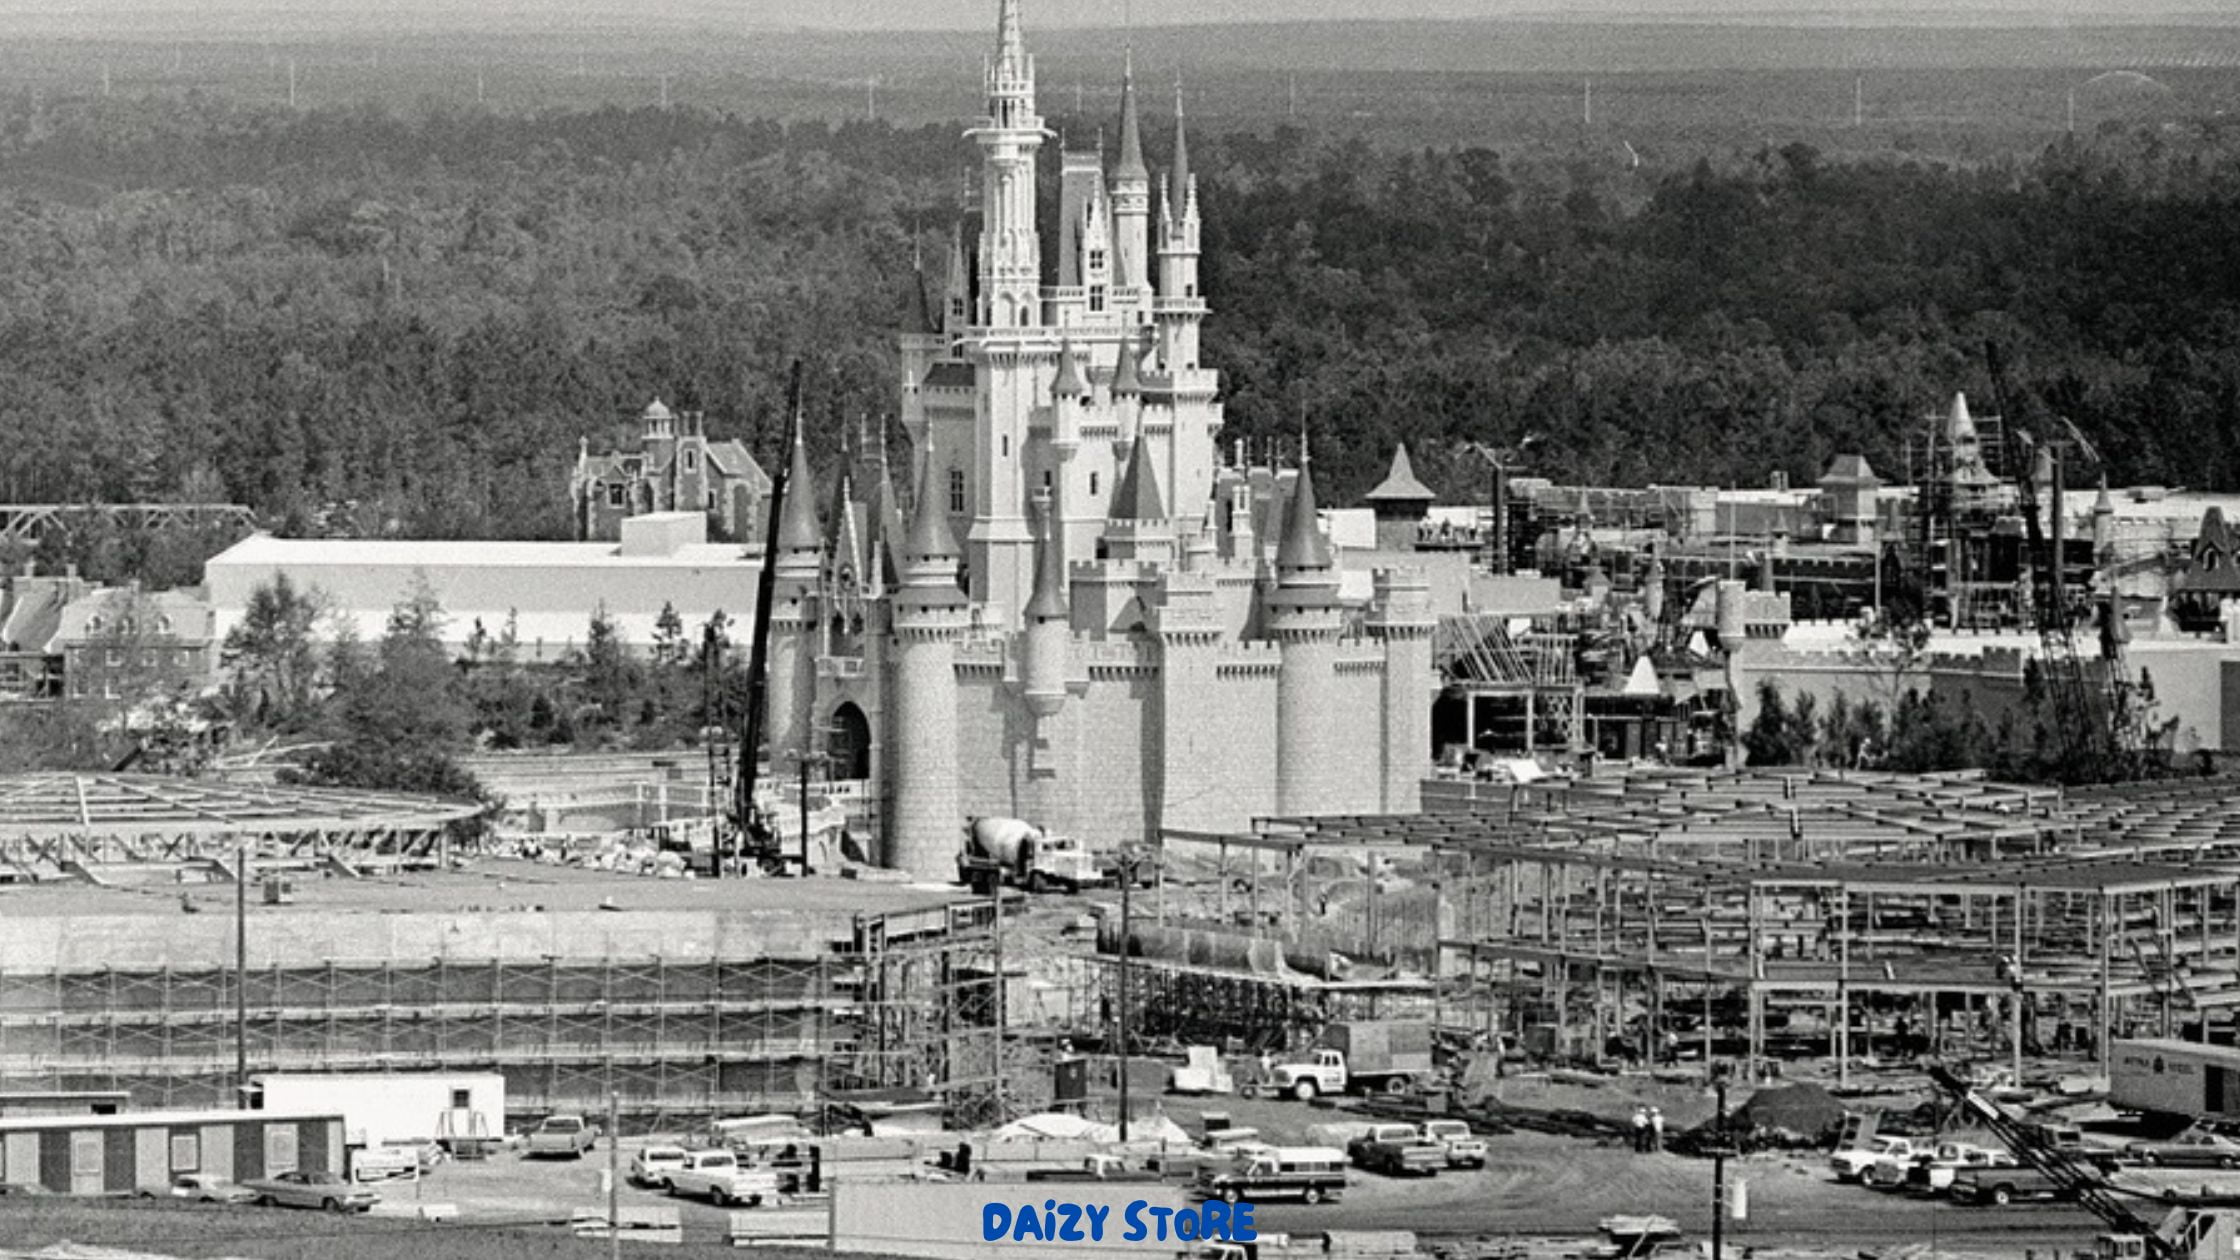 The opening of Disneyland and the growth of the company